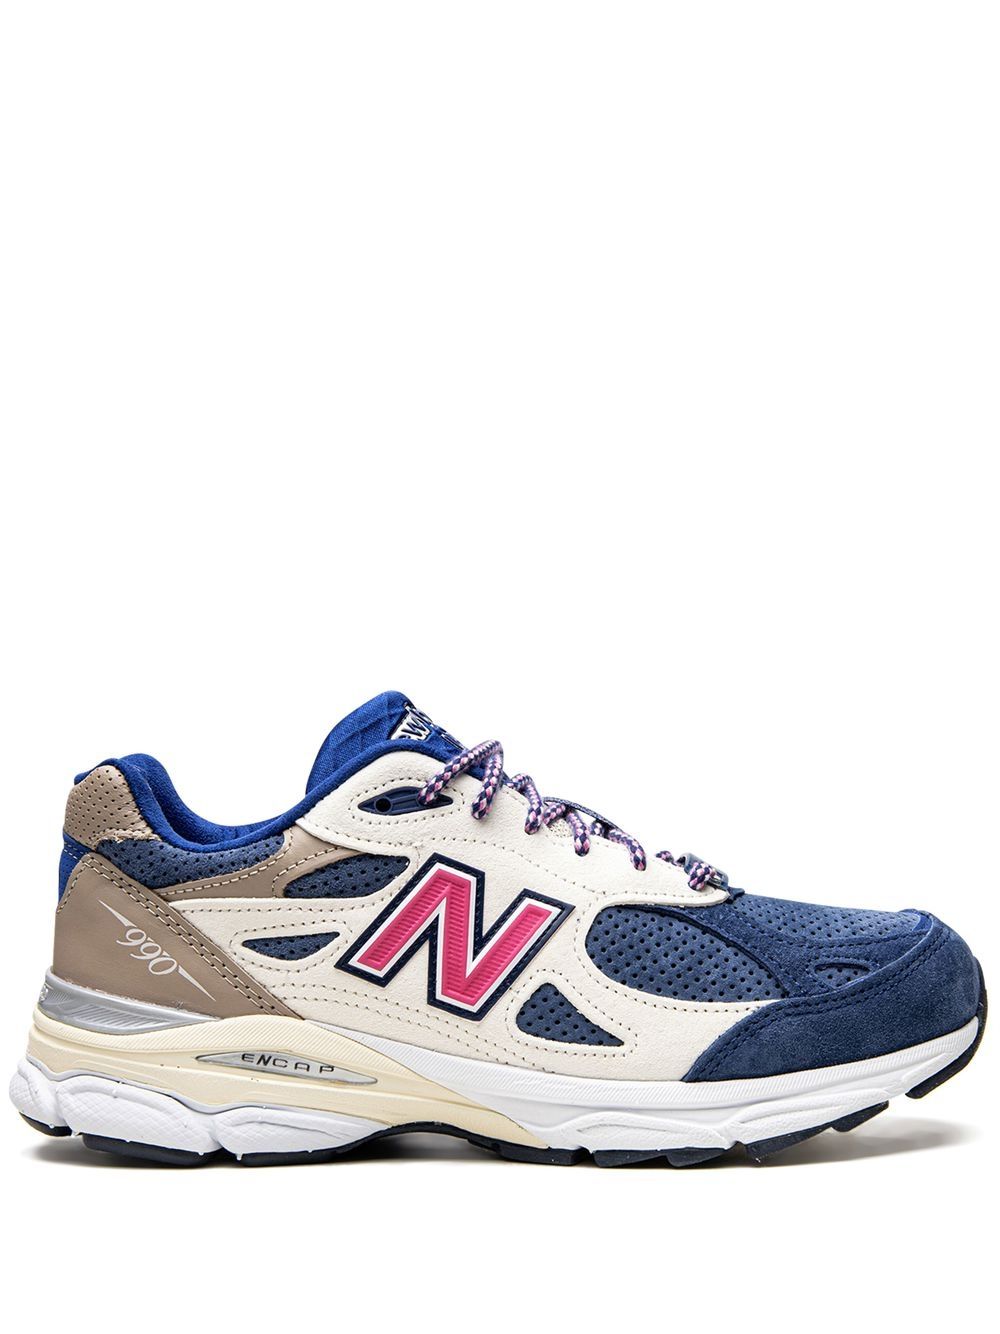 New Balance 990 V3 sneakers - Blue